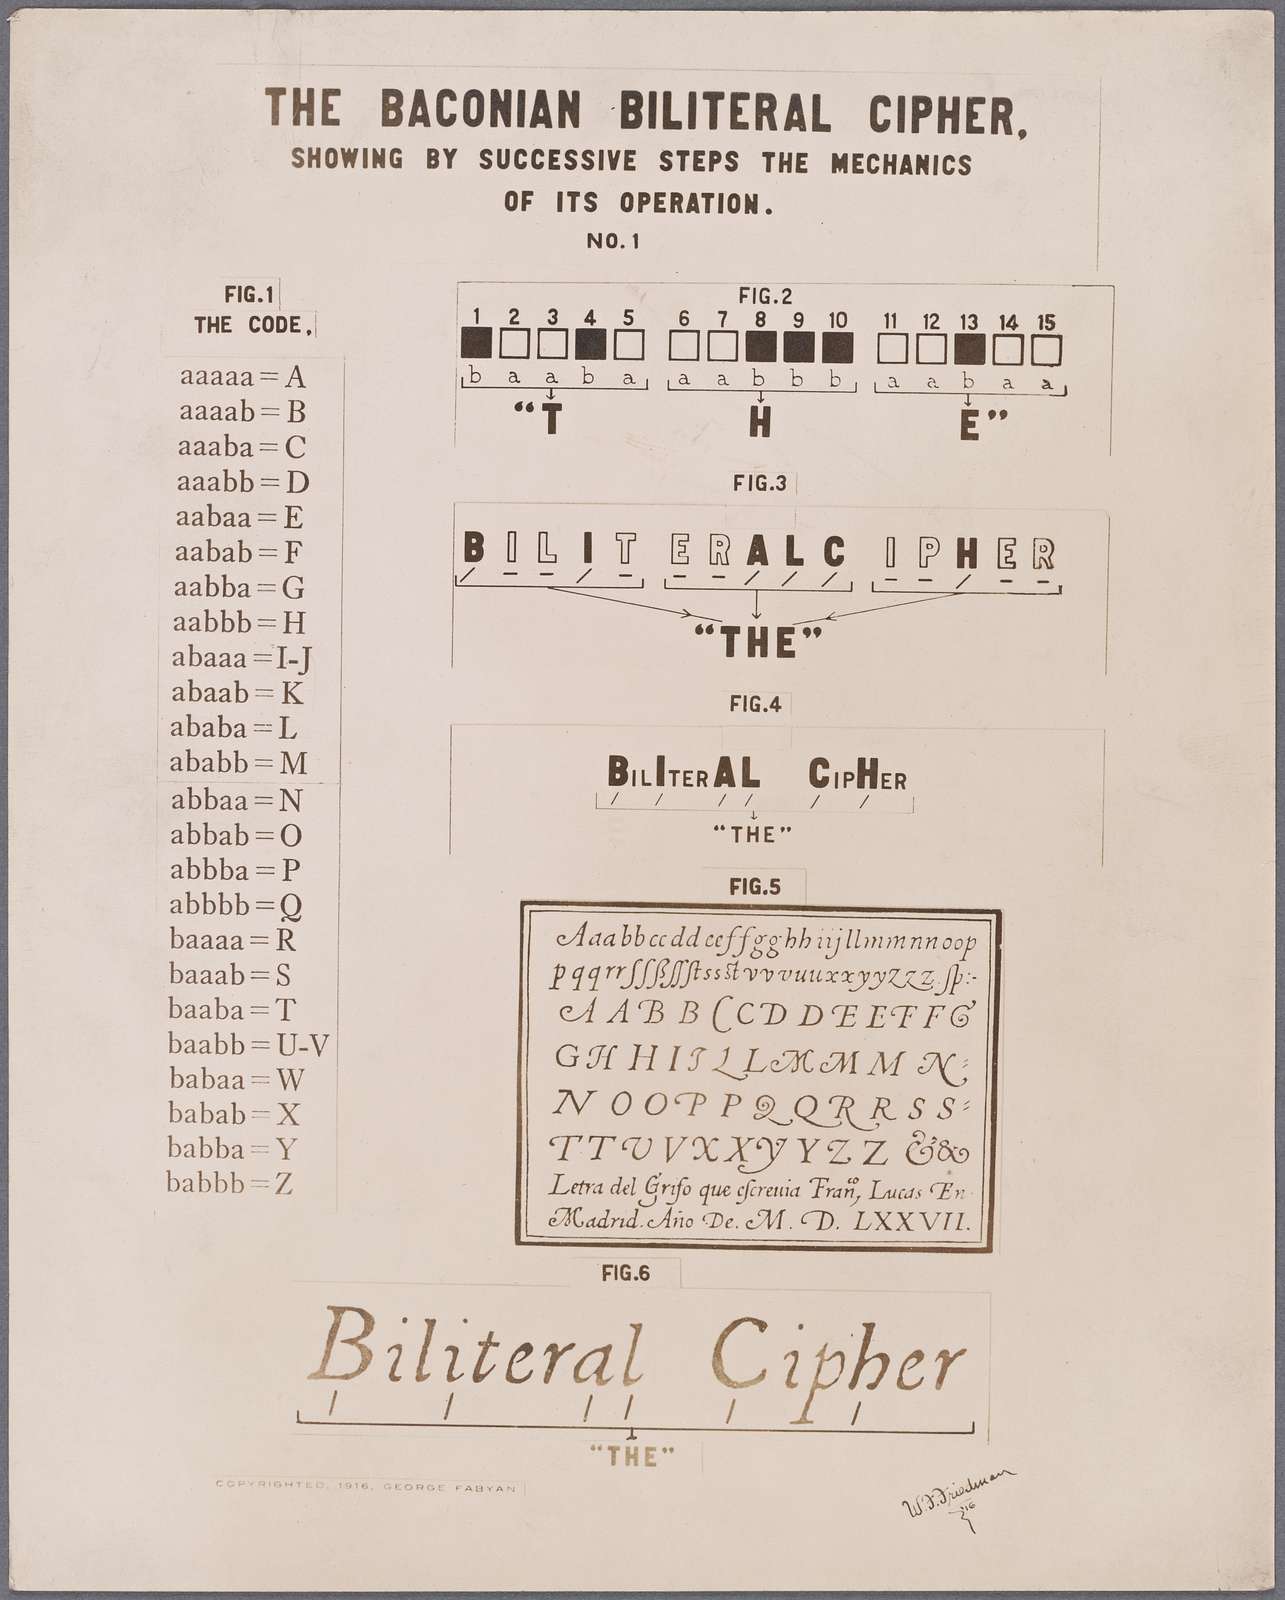 baconian cipher challenge